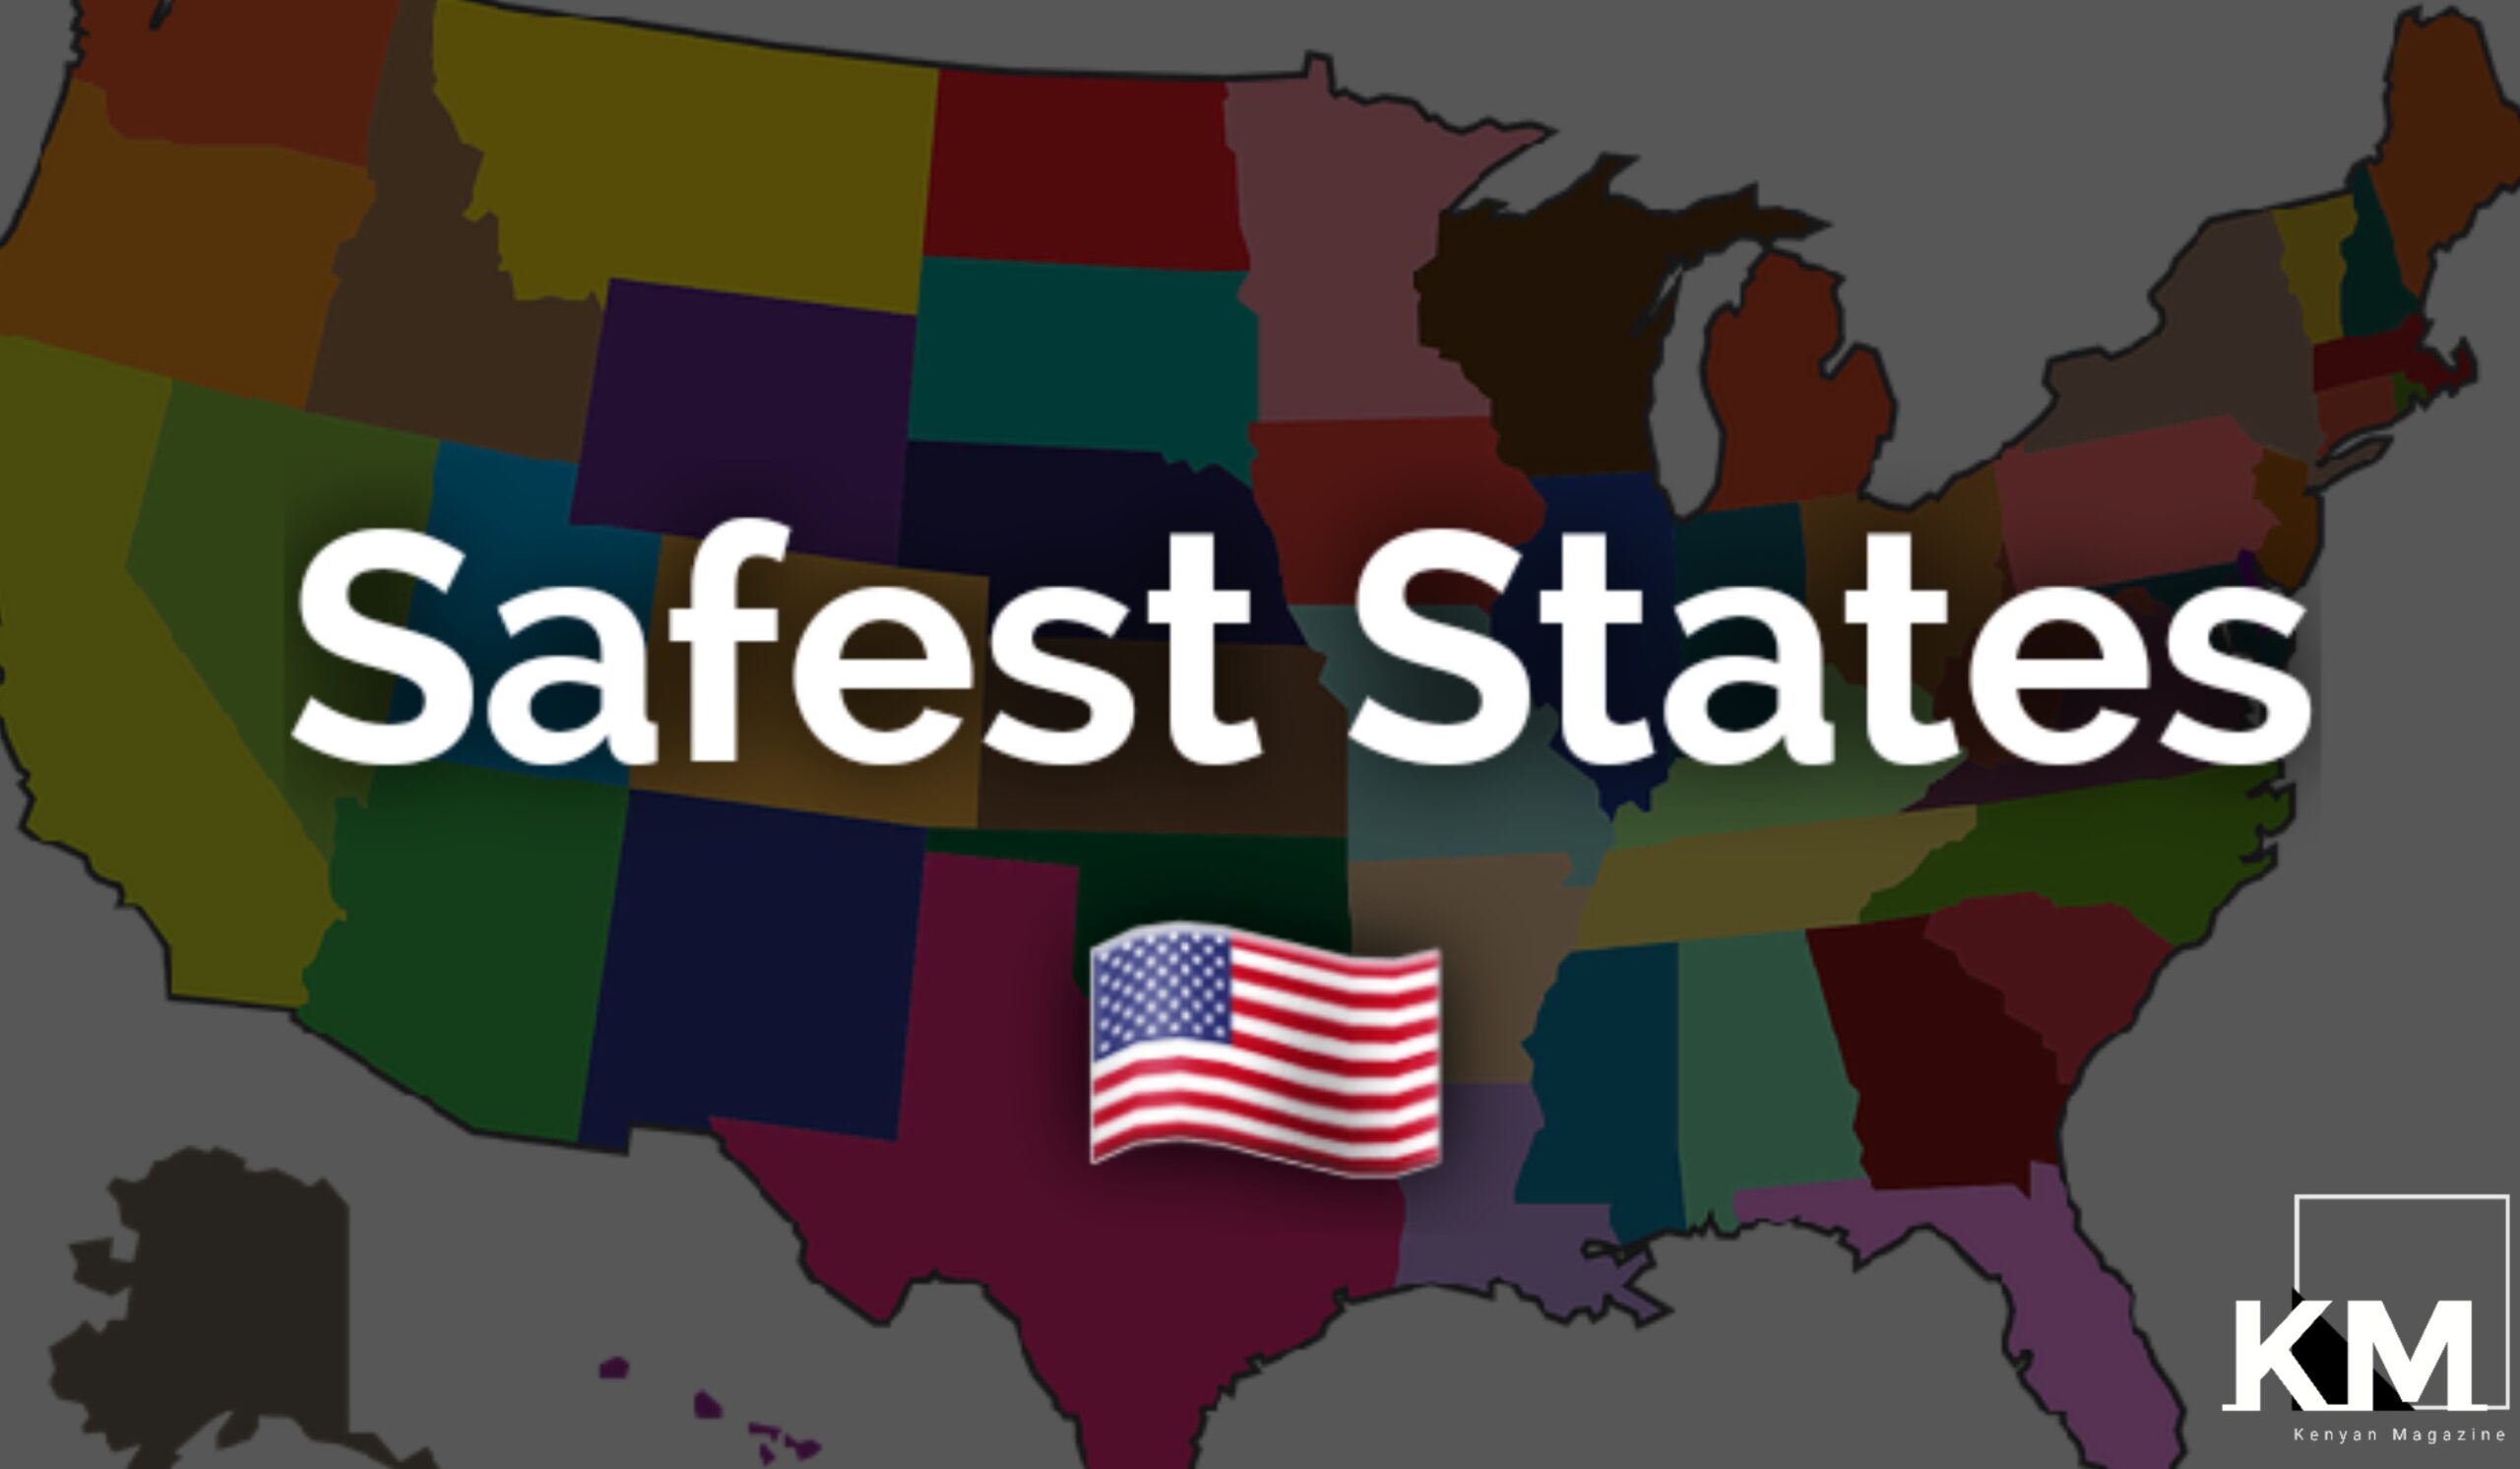 Safest states in USA